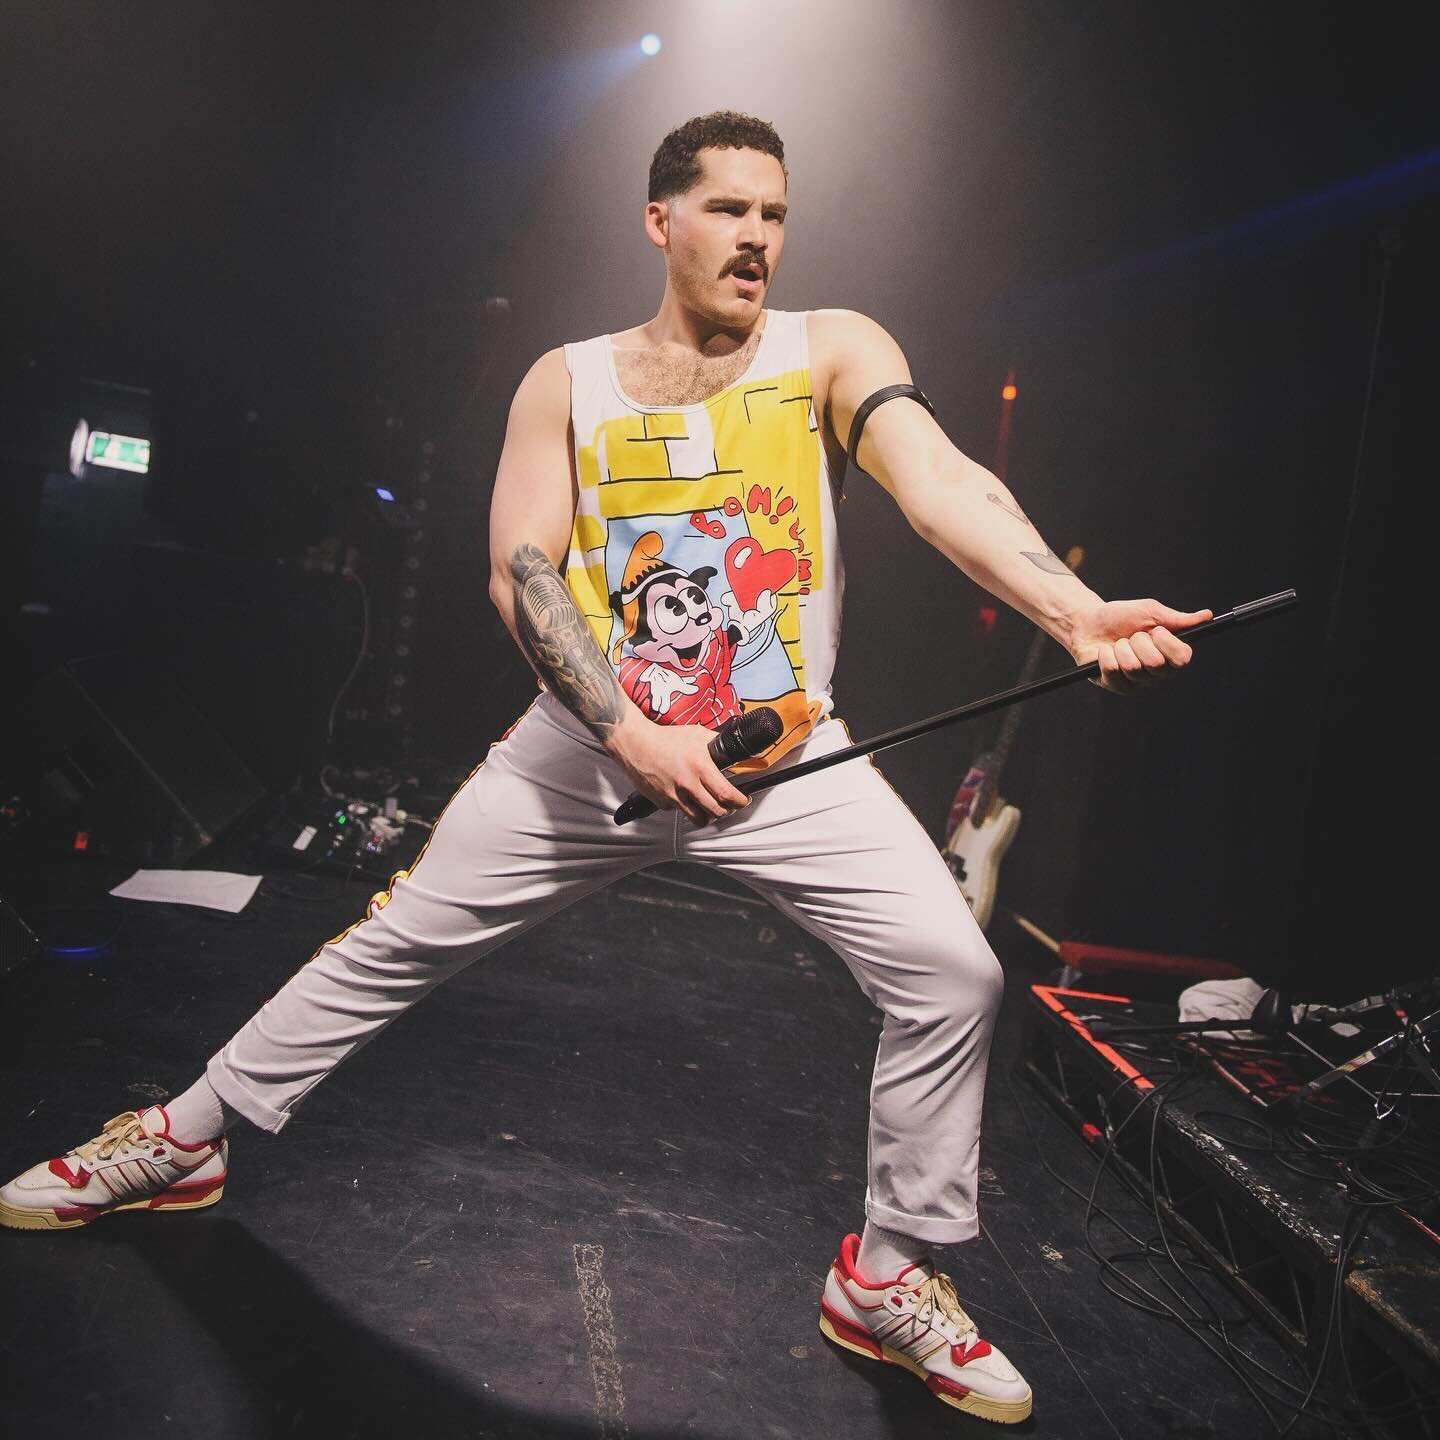 Available This Weekend - 2nd &amp; 3rd of February!
Freddie Mercury Tribute Act - Fully self-contained, get in touch for more info. 👨🏻

I have a fabulous new drag show called &ldquo;That Freddie Queen&rdquo;. Take a look at my live performances via